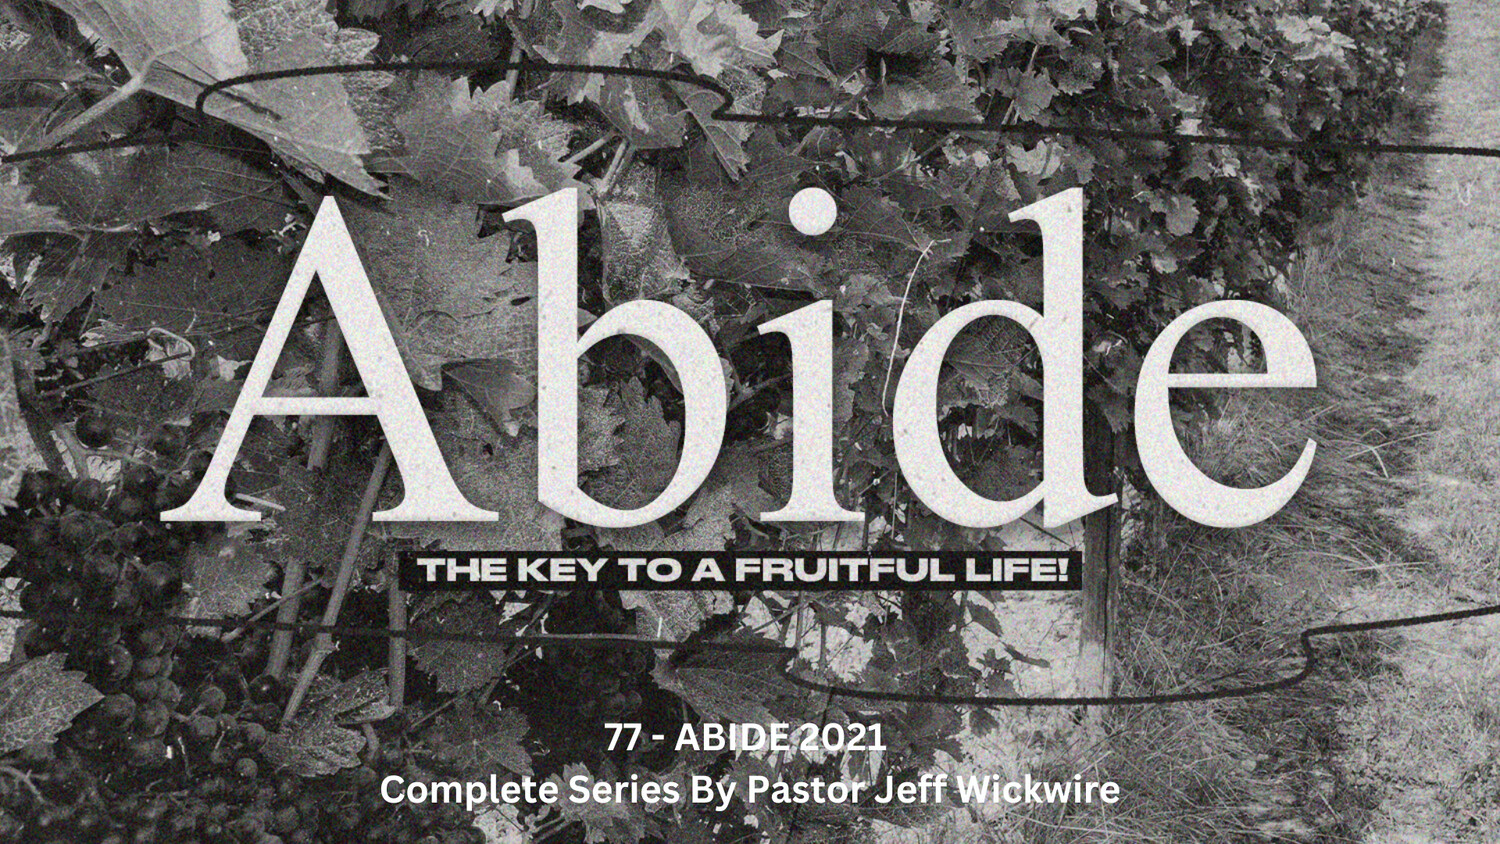 77 - ABIDE 2021 - Complete Series By Pastor Jeff Wickwire